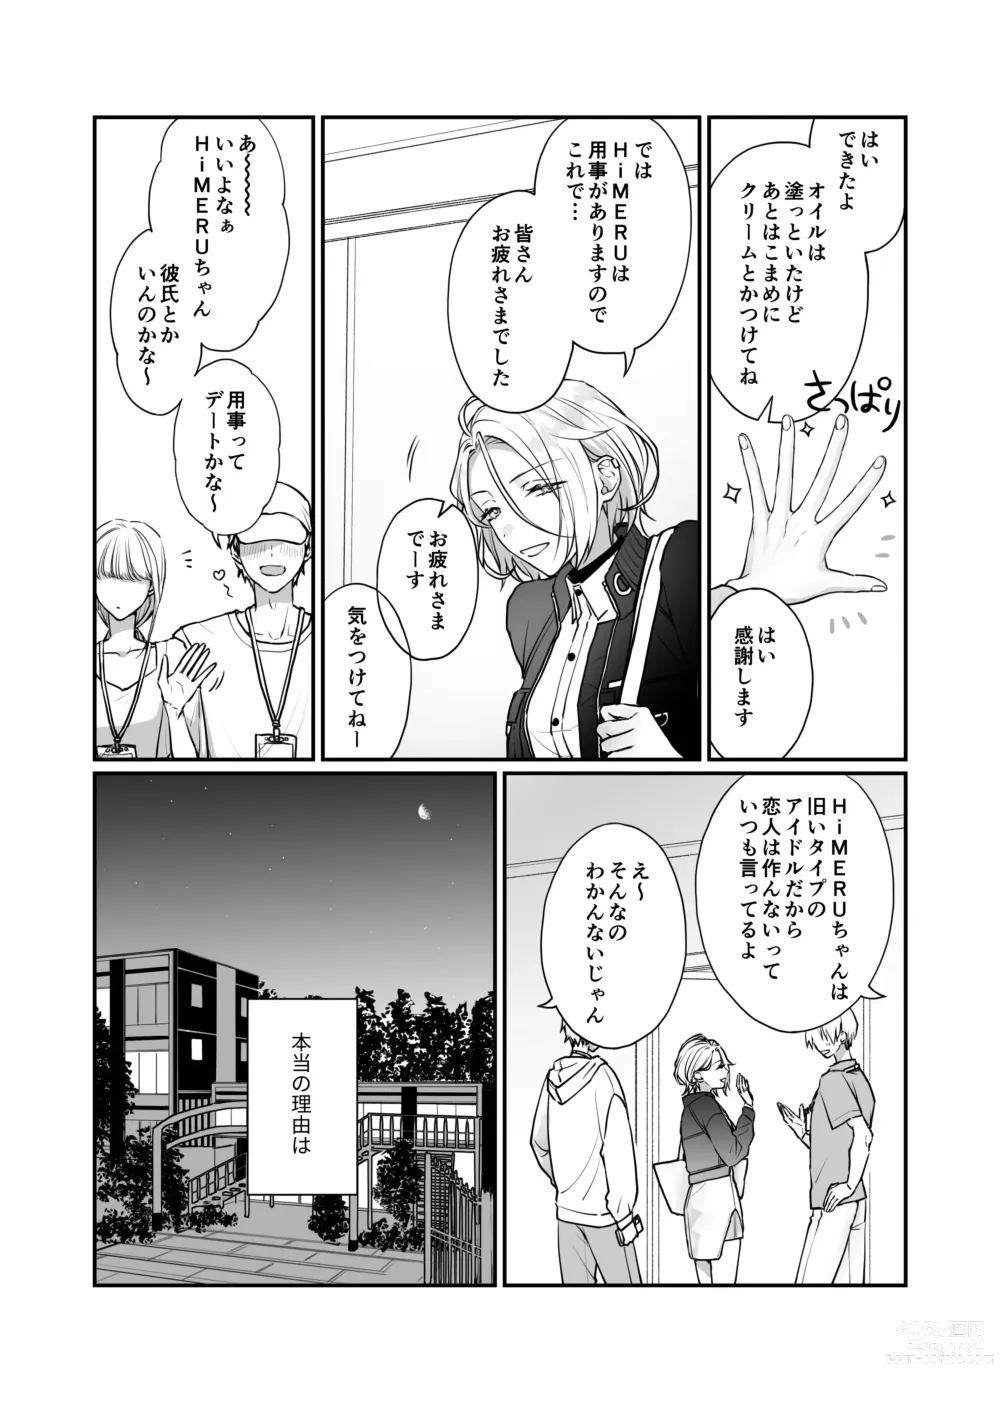 Page 5 of doujinshi FH2T